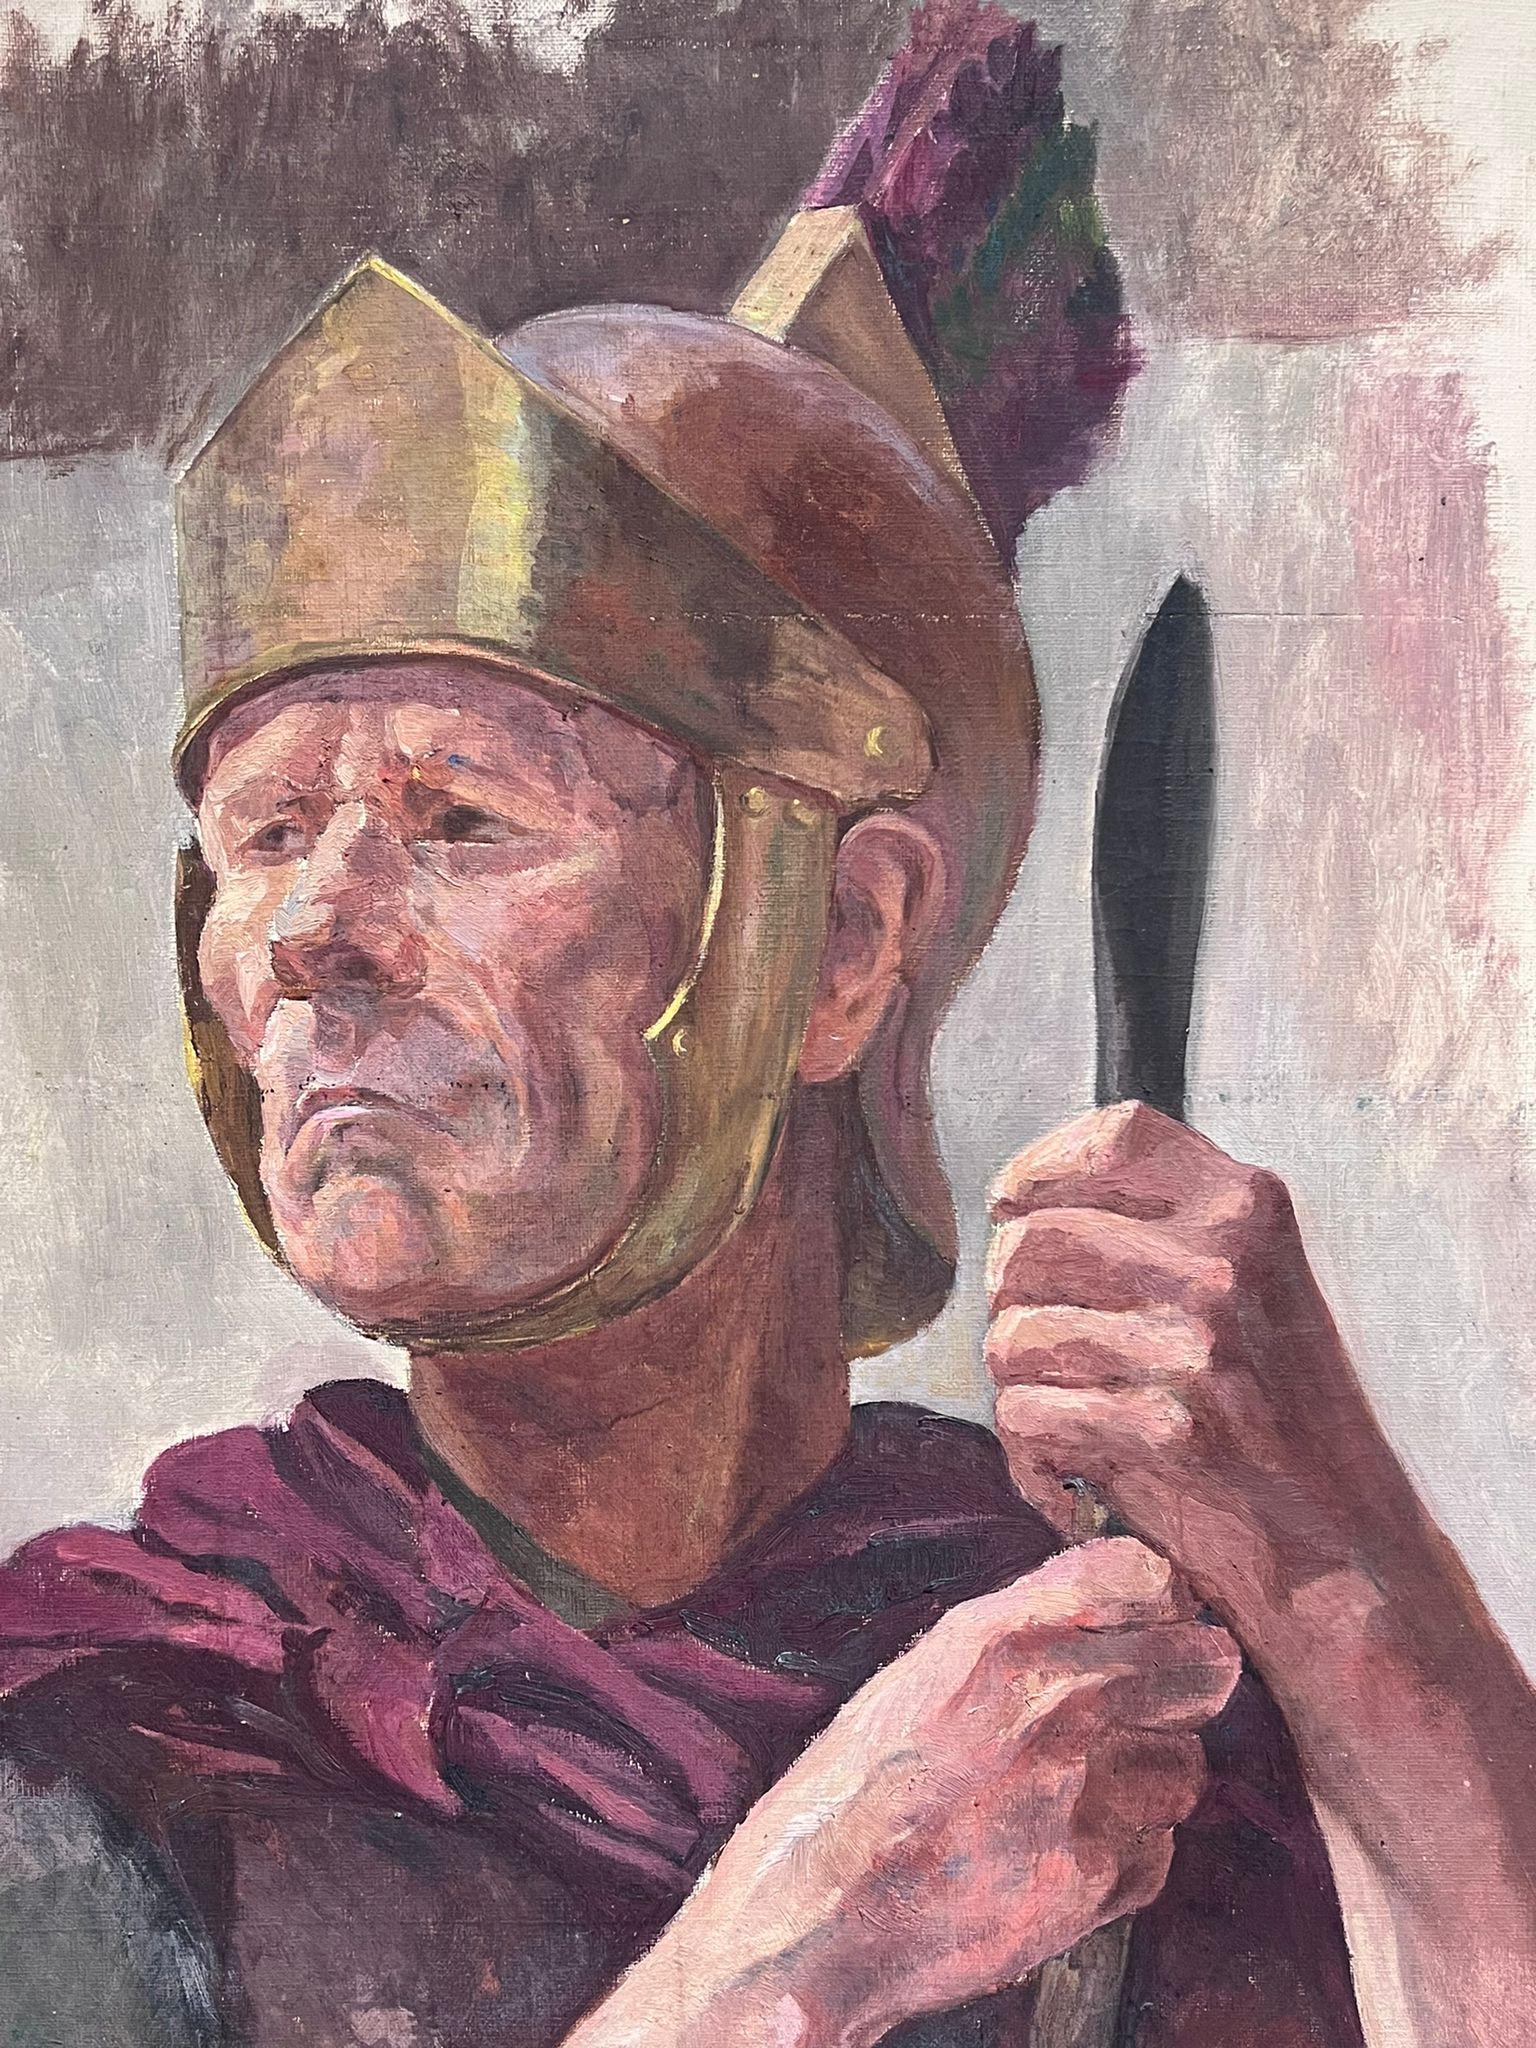 The Roman Soldier
French artist, mid 20th century
oil on canvas, unframed
canvas: 24 x 20 inches
provenance: private collection, France
condition: overall good and sound condition 